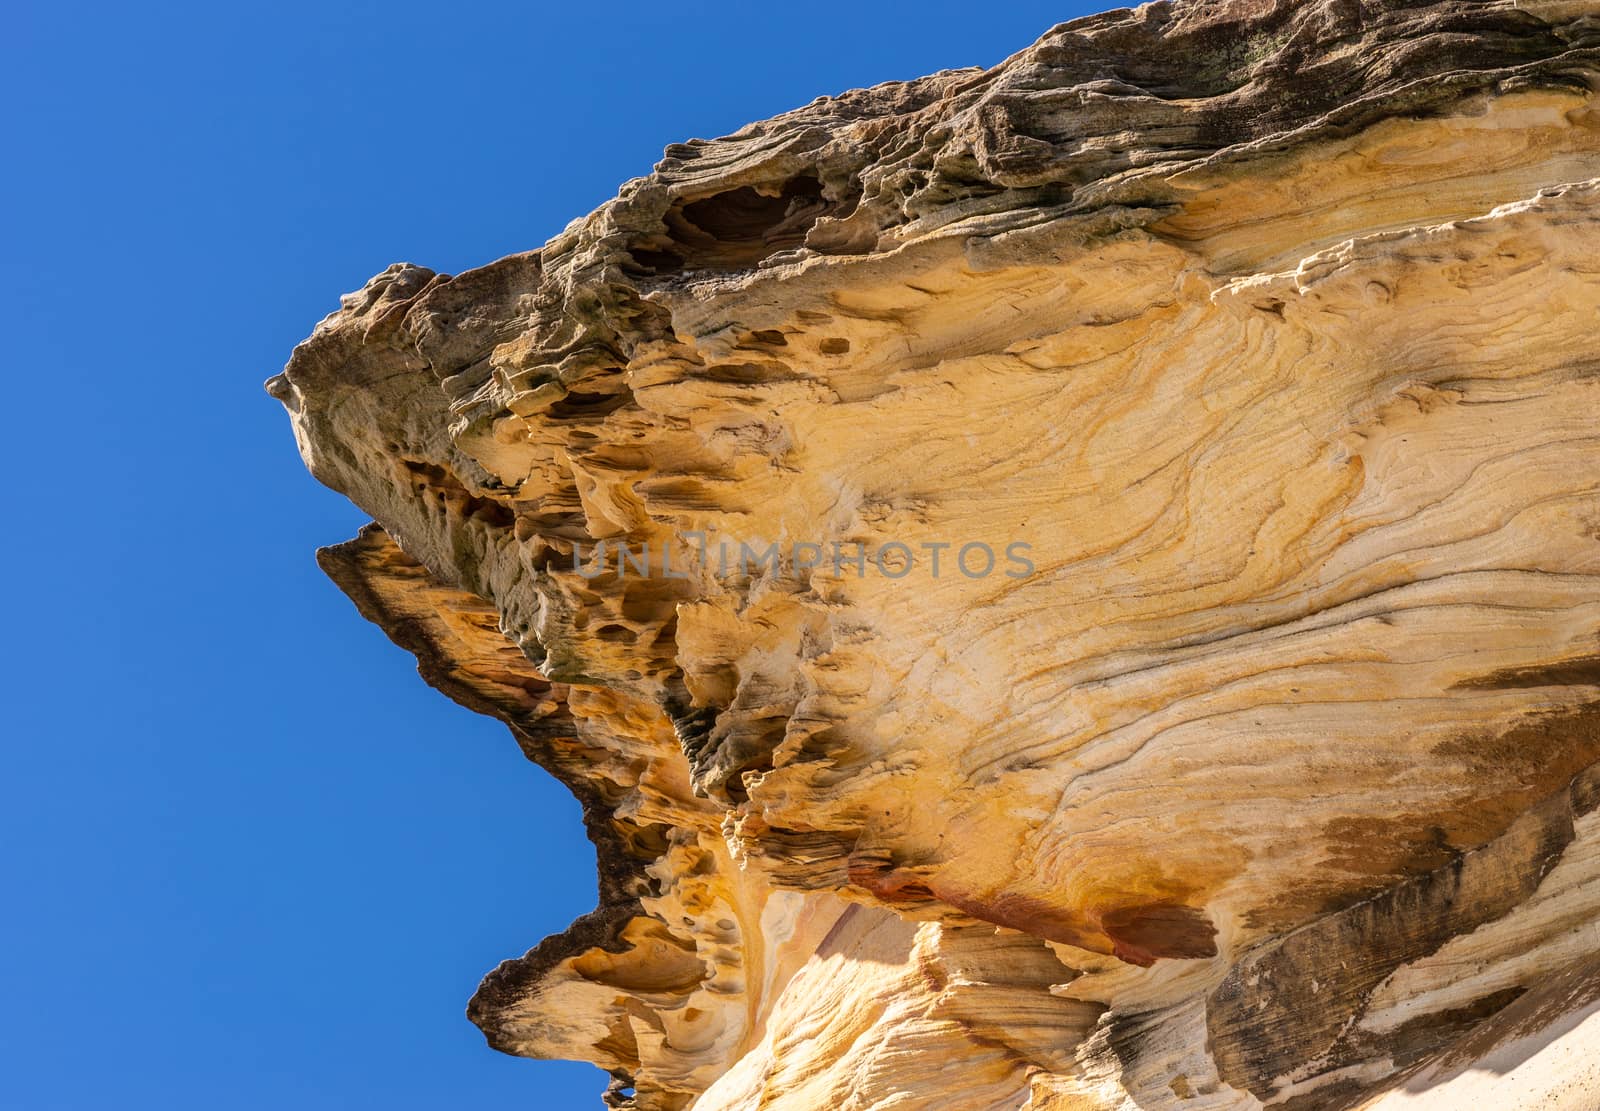 Sydney, Australia - February 11, 2019: Closeup of Oyster Shell like rock formation made by erosion on South shore cliffs overlooking Bronte Beach under blue sky. Dominant yellows and browns.